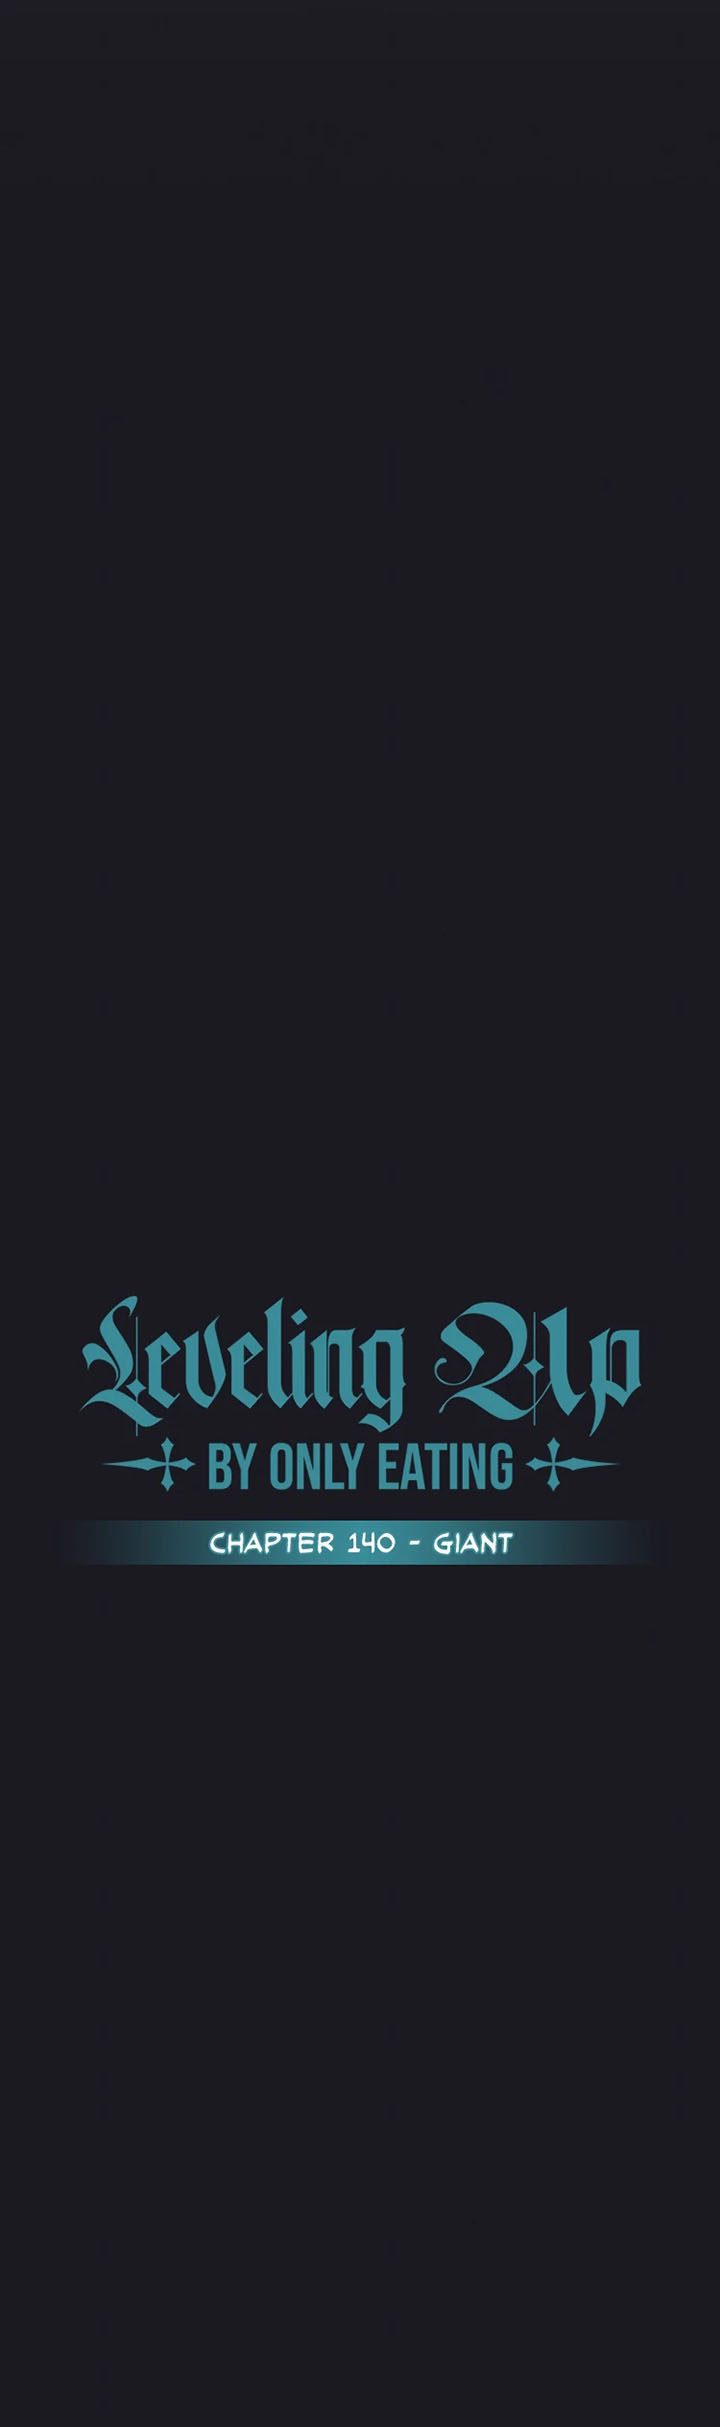 Leveling Up, By Only Eating! Chapter 140